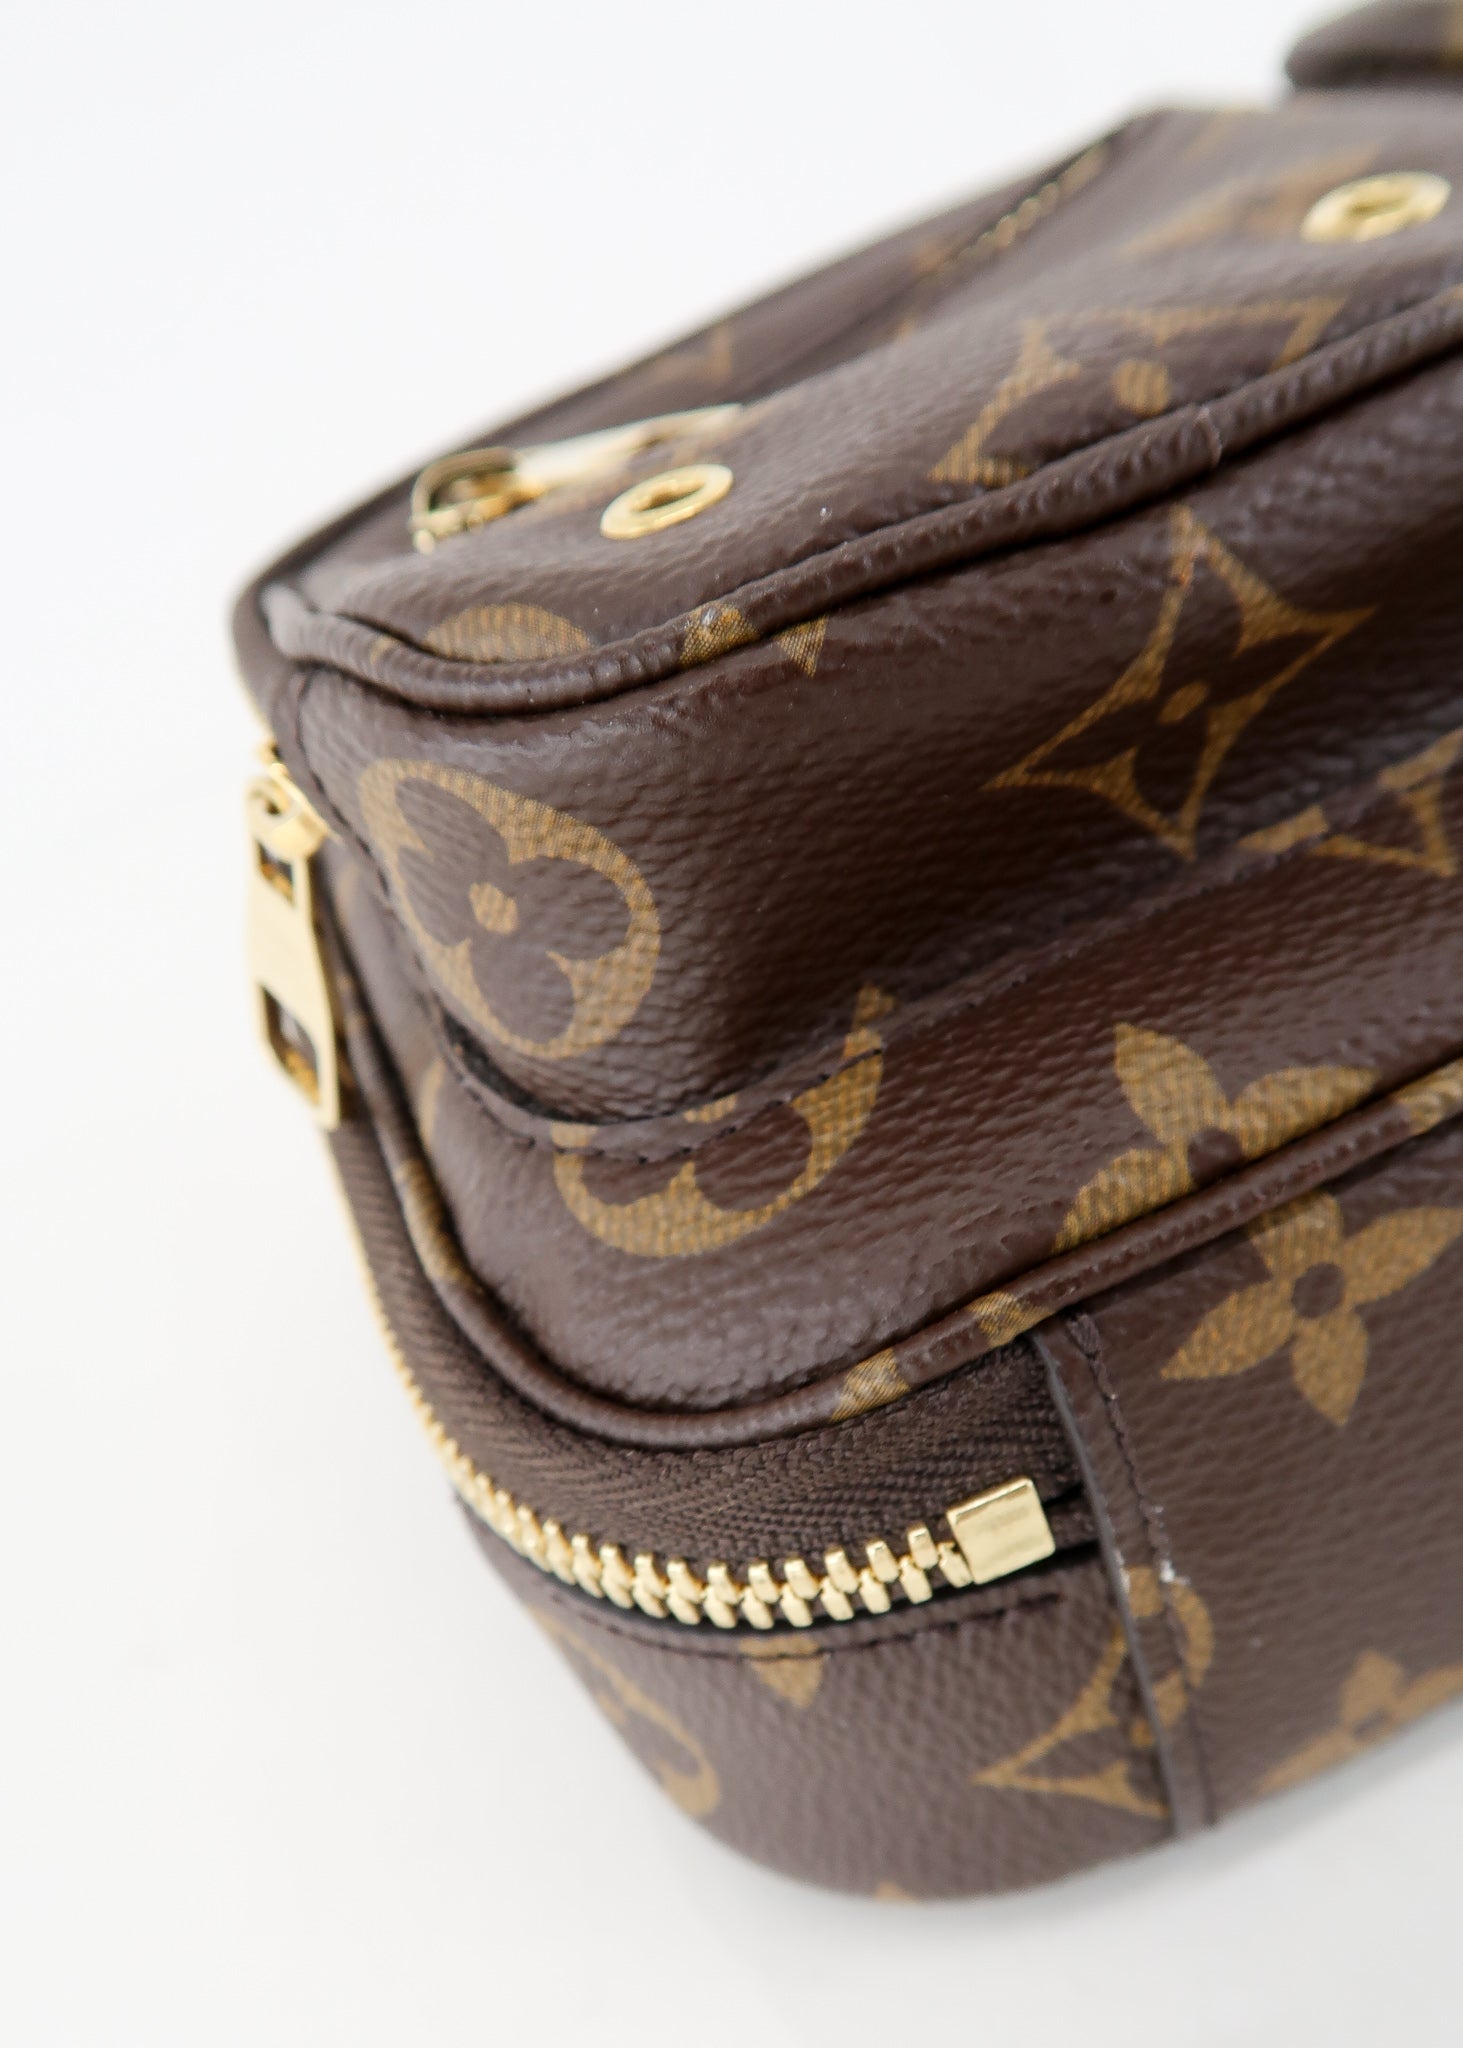 Louis Vuitton Utility Crossbody Monogram now on luxeitfwd.com.au 🤎  Featuring classic LV monogram coated canvas exterior, detachable/adjustable  web shoulder strap and multiple compartments/pockets . This monogramed  utility bag is available 